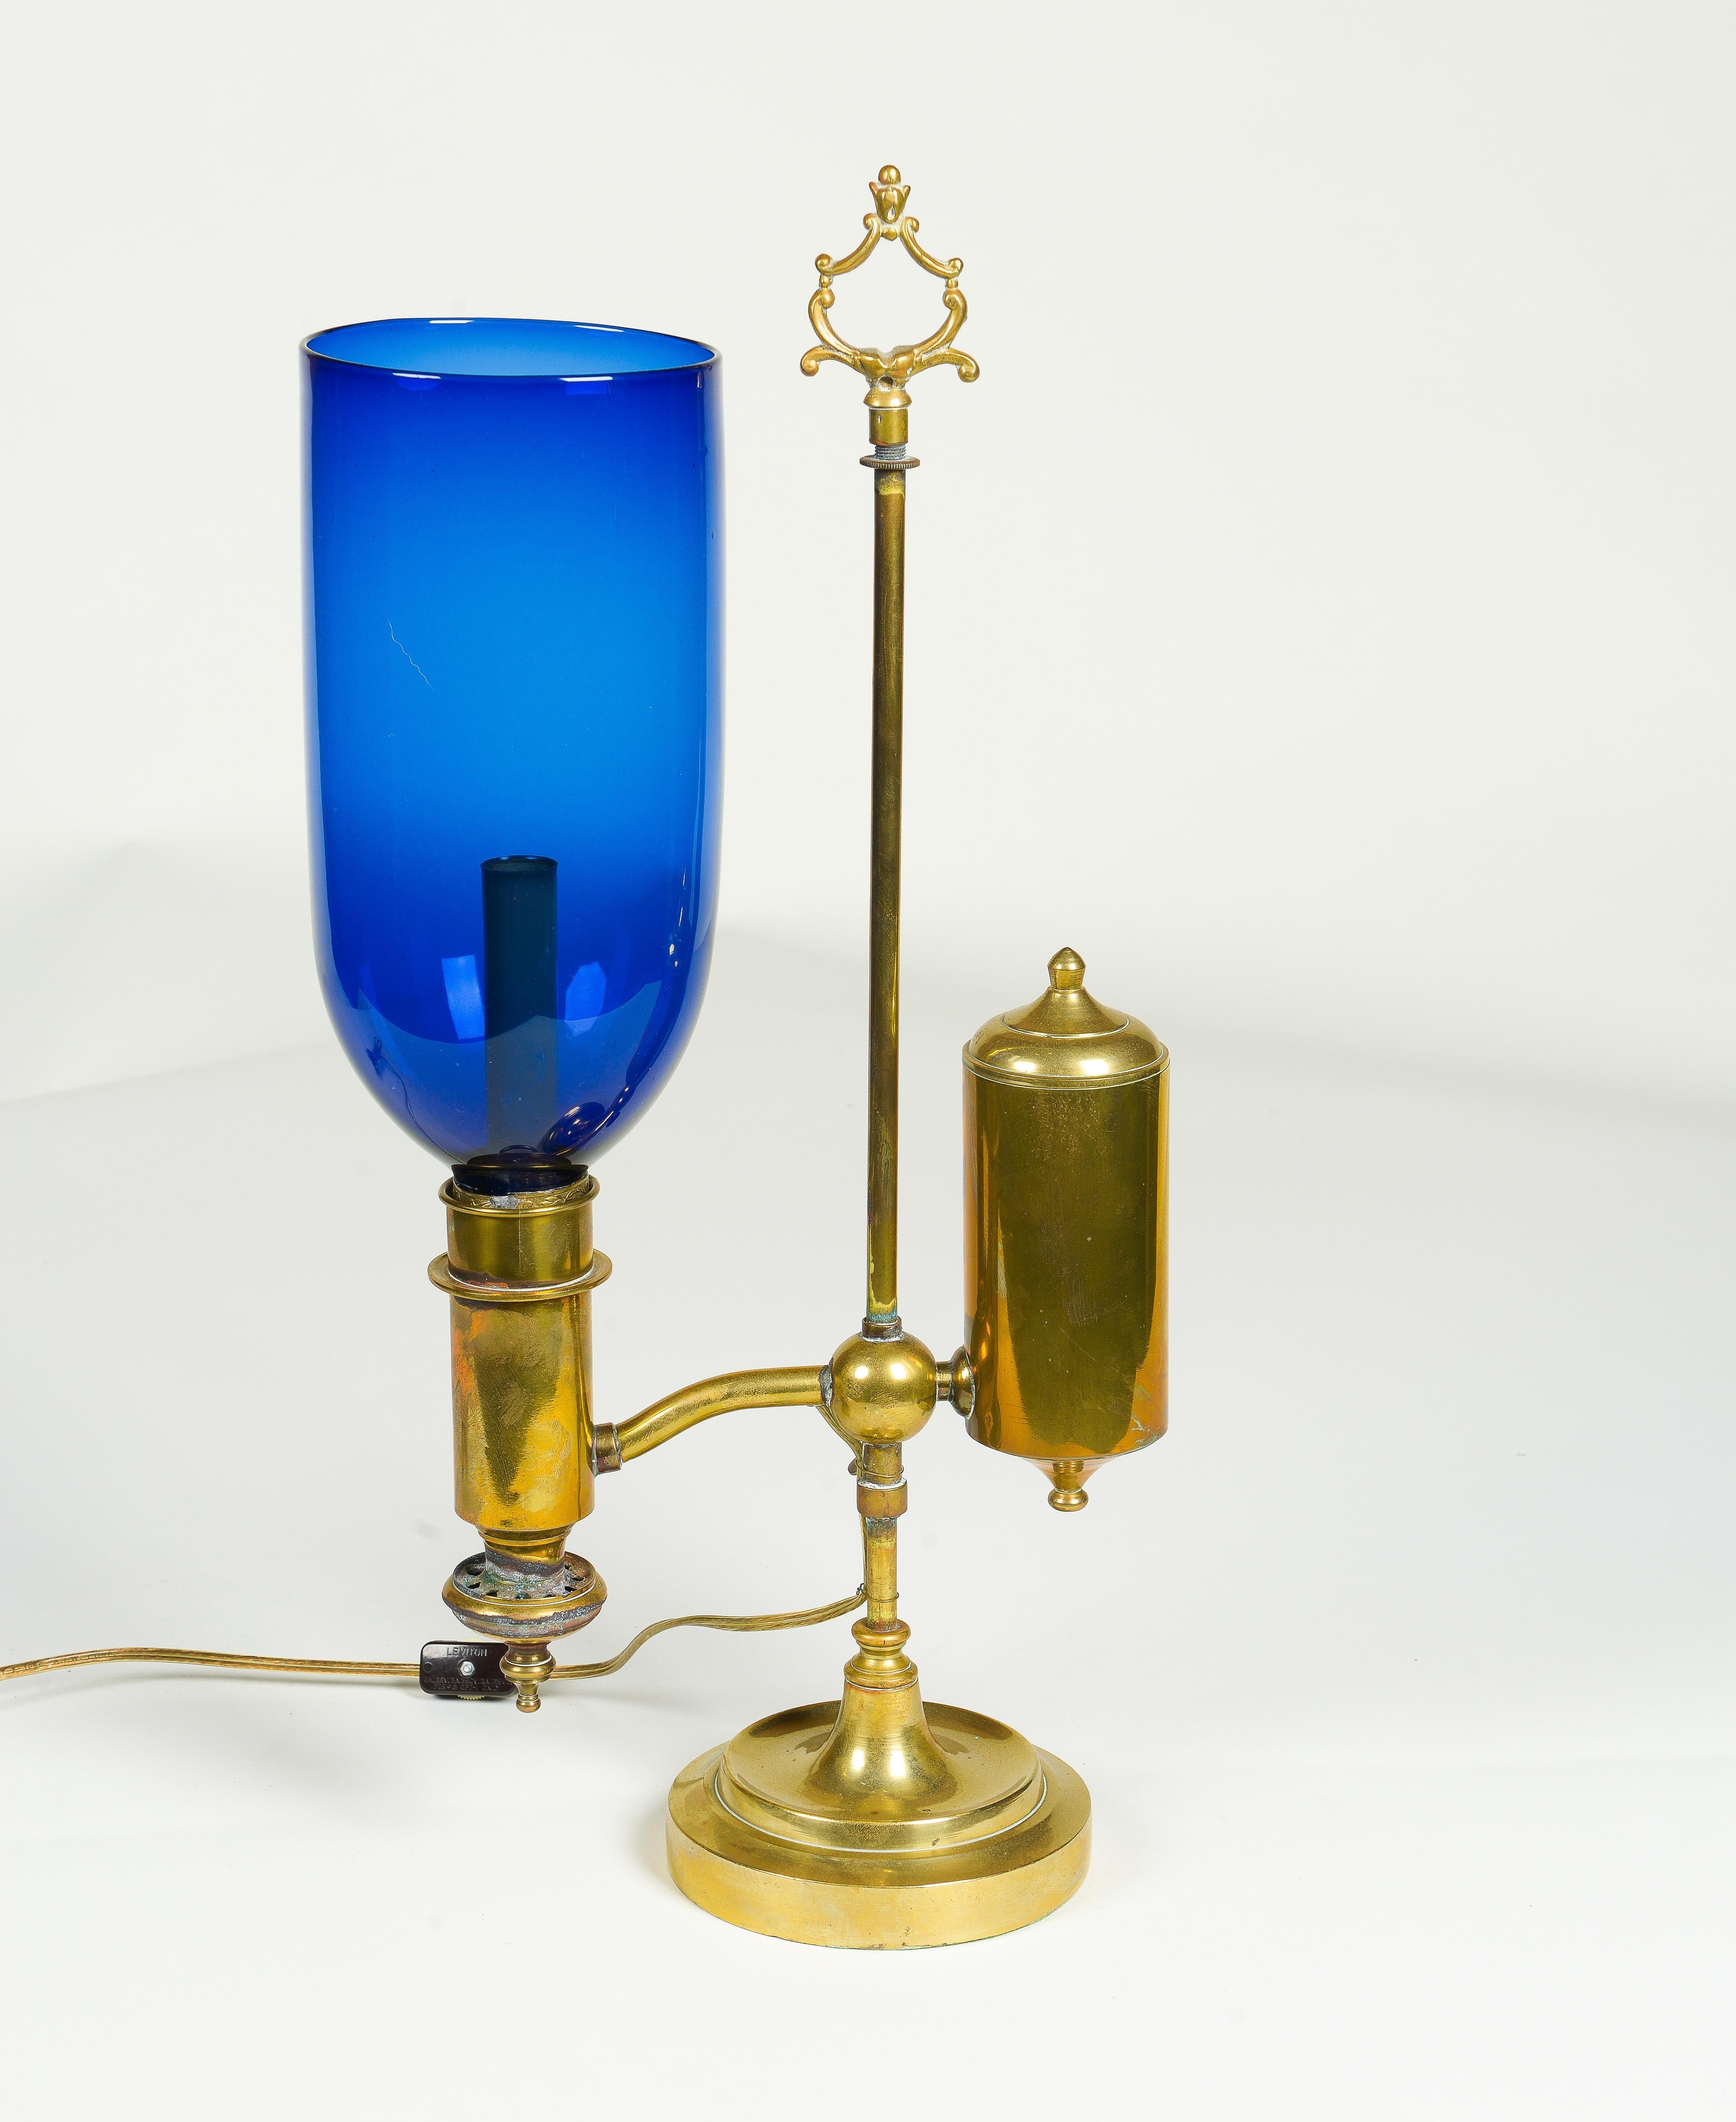 19th Century A Pair of English Student Brass Lamps with Blue Hurricane Shades